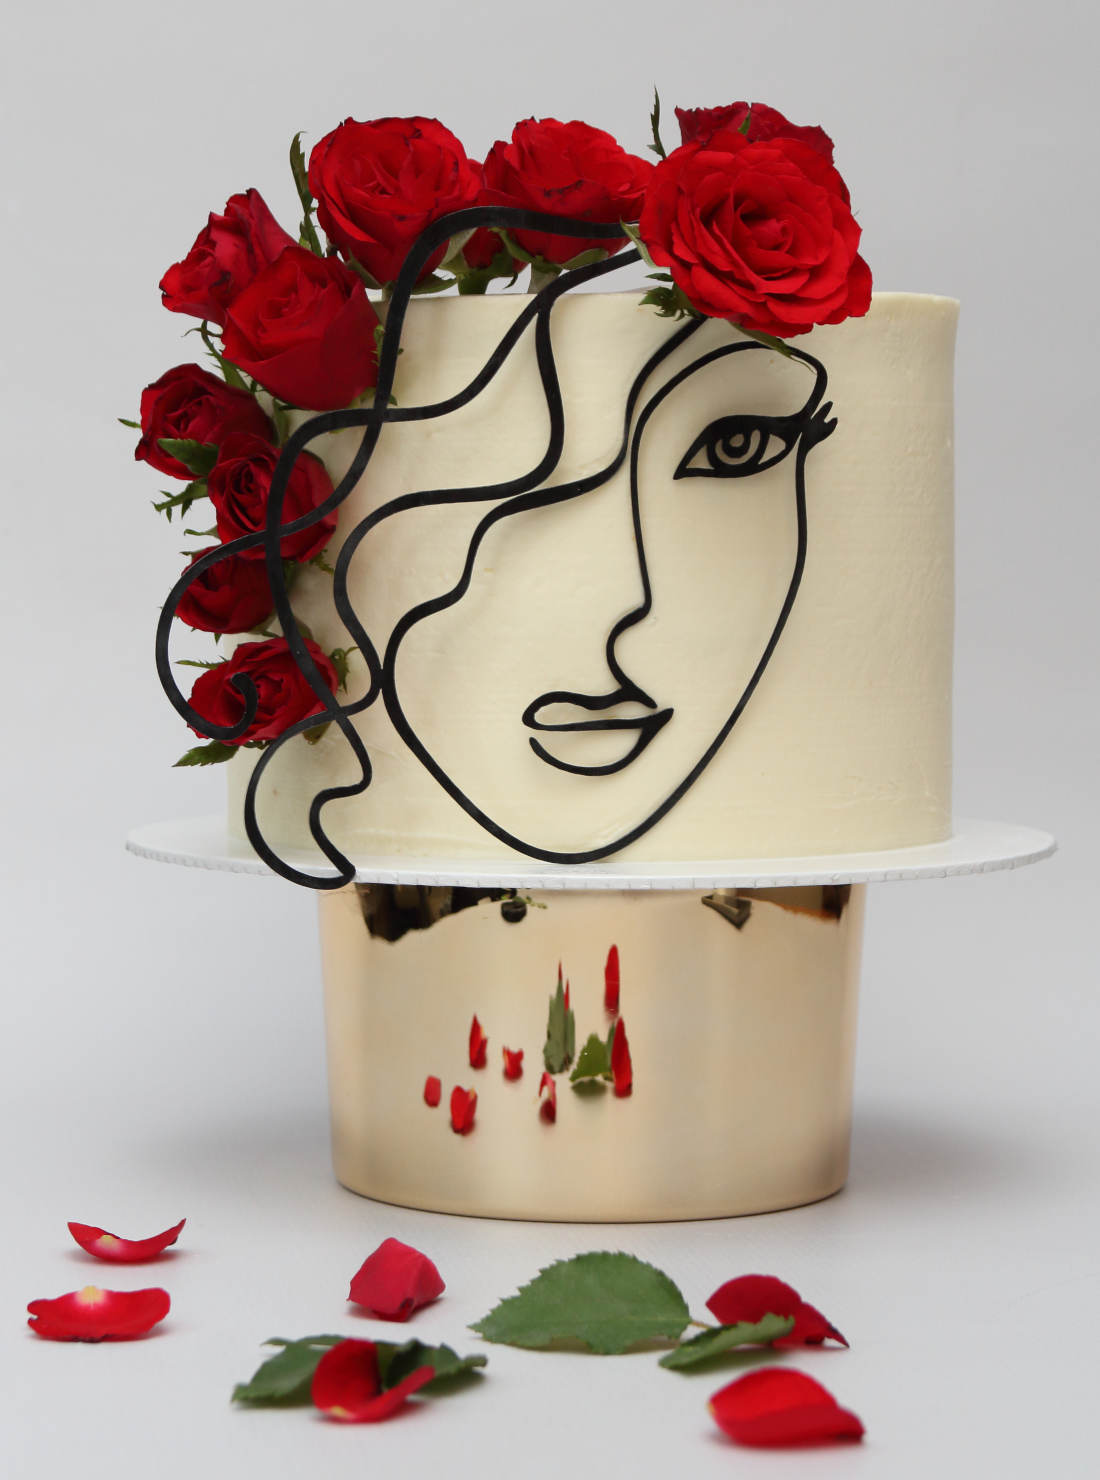 Natural red roses on a cake with the image of a girl